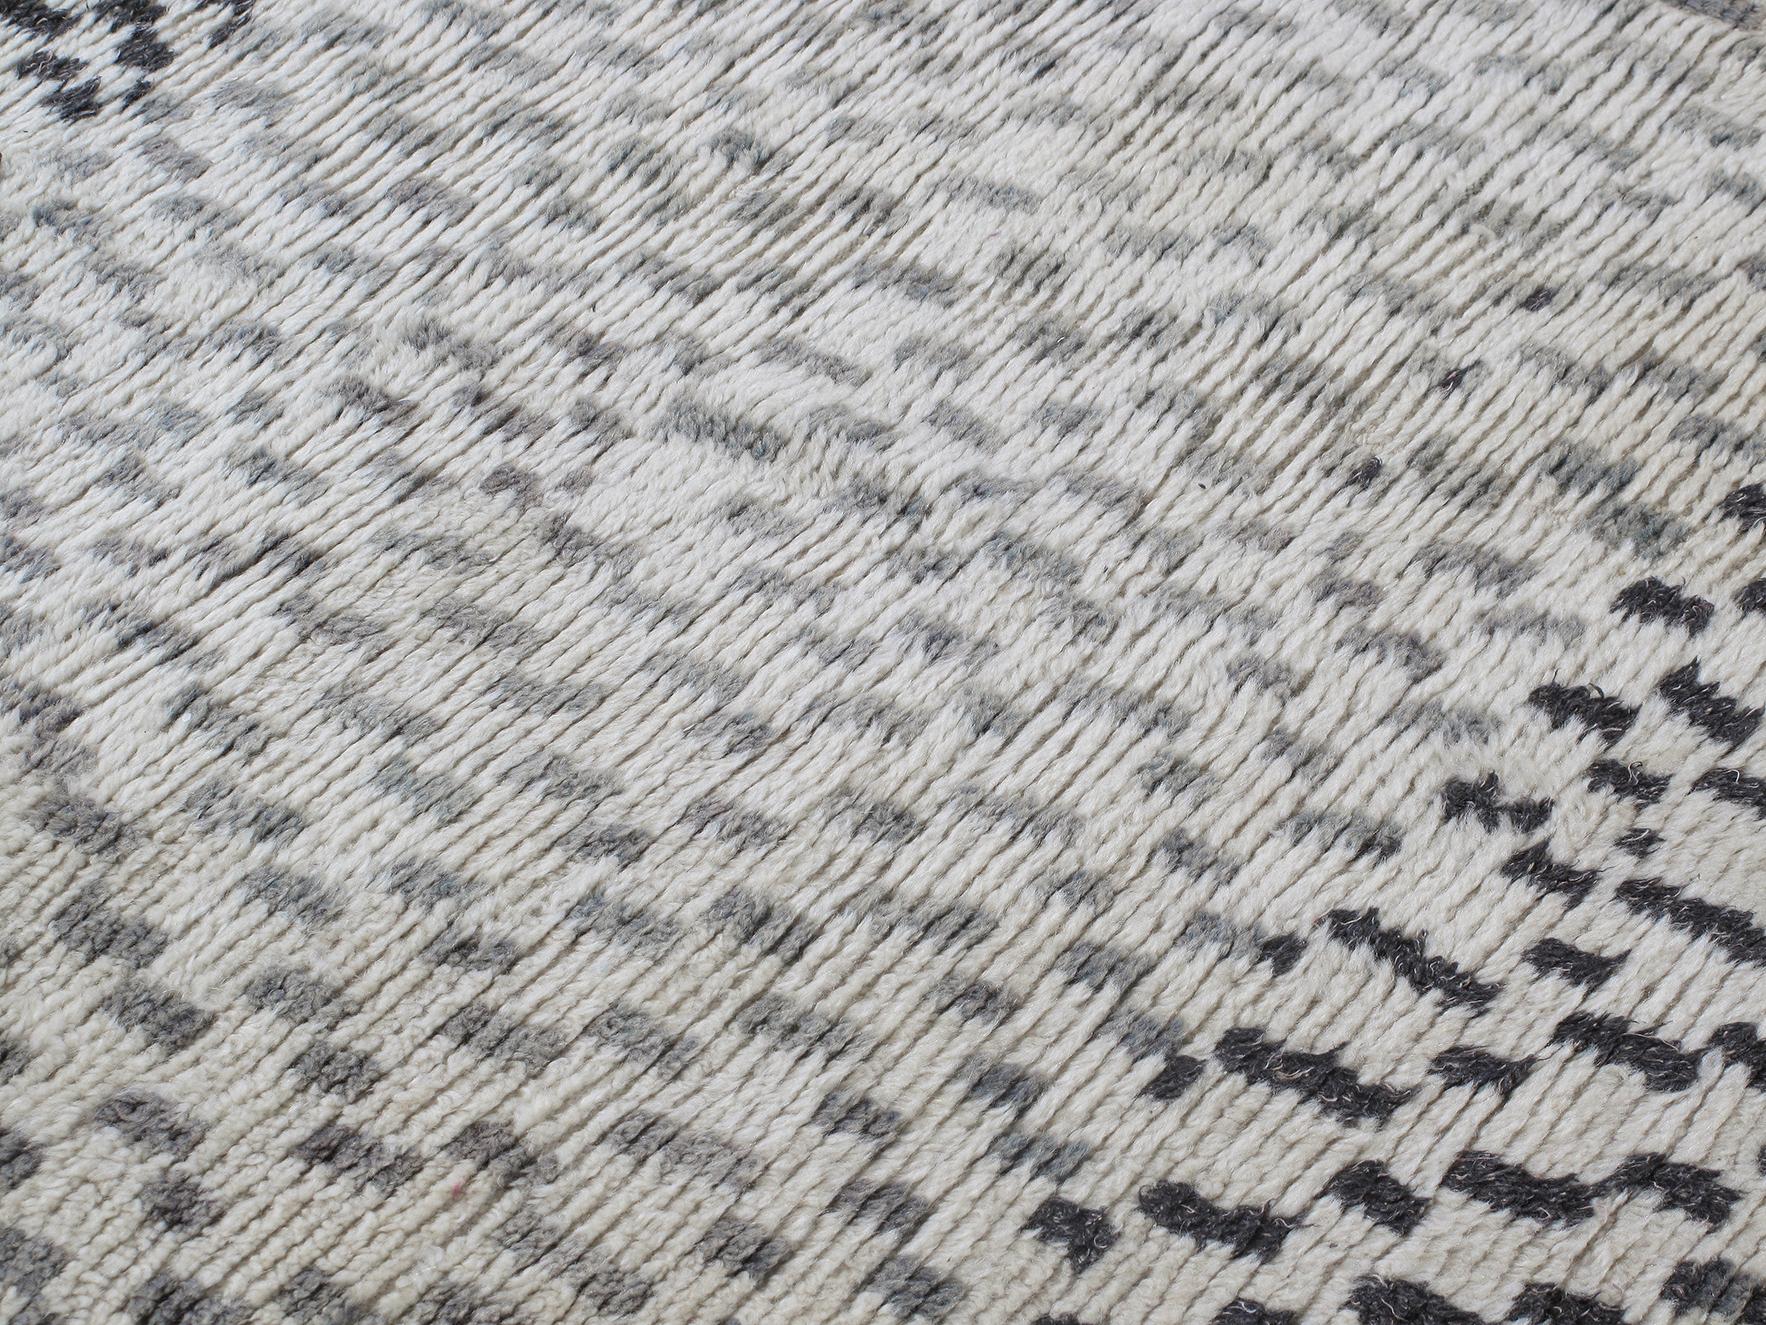 Vintage Moroccan Berber hand-knotted wool rug is hand-carded with all natural dyes in beige, black and grey colors. Selectively curated from thousands of pieces, our Moroccan Collection represents the most unique styles from the Atlas Mountain